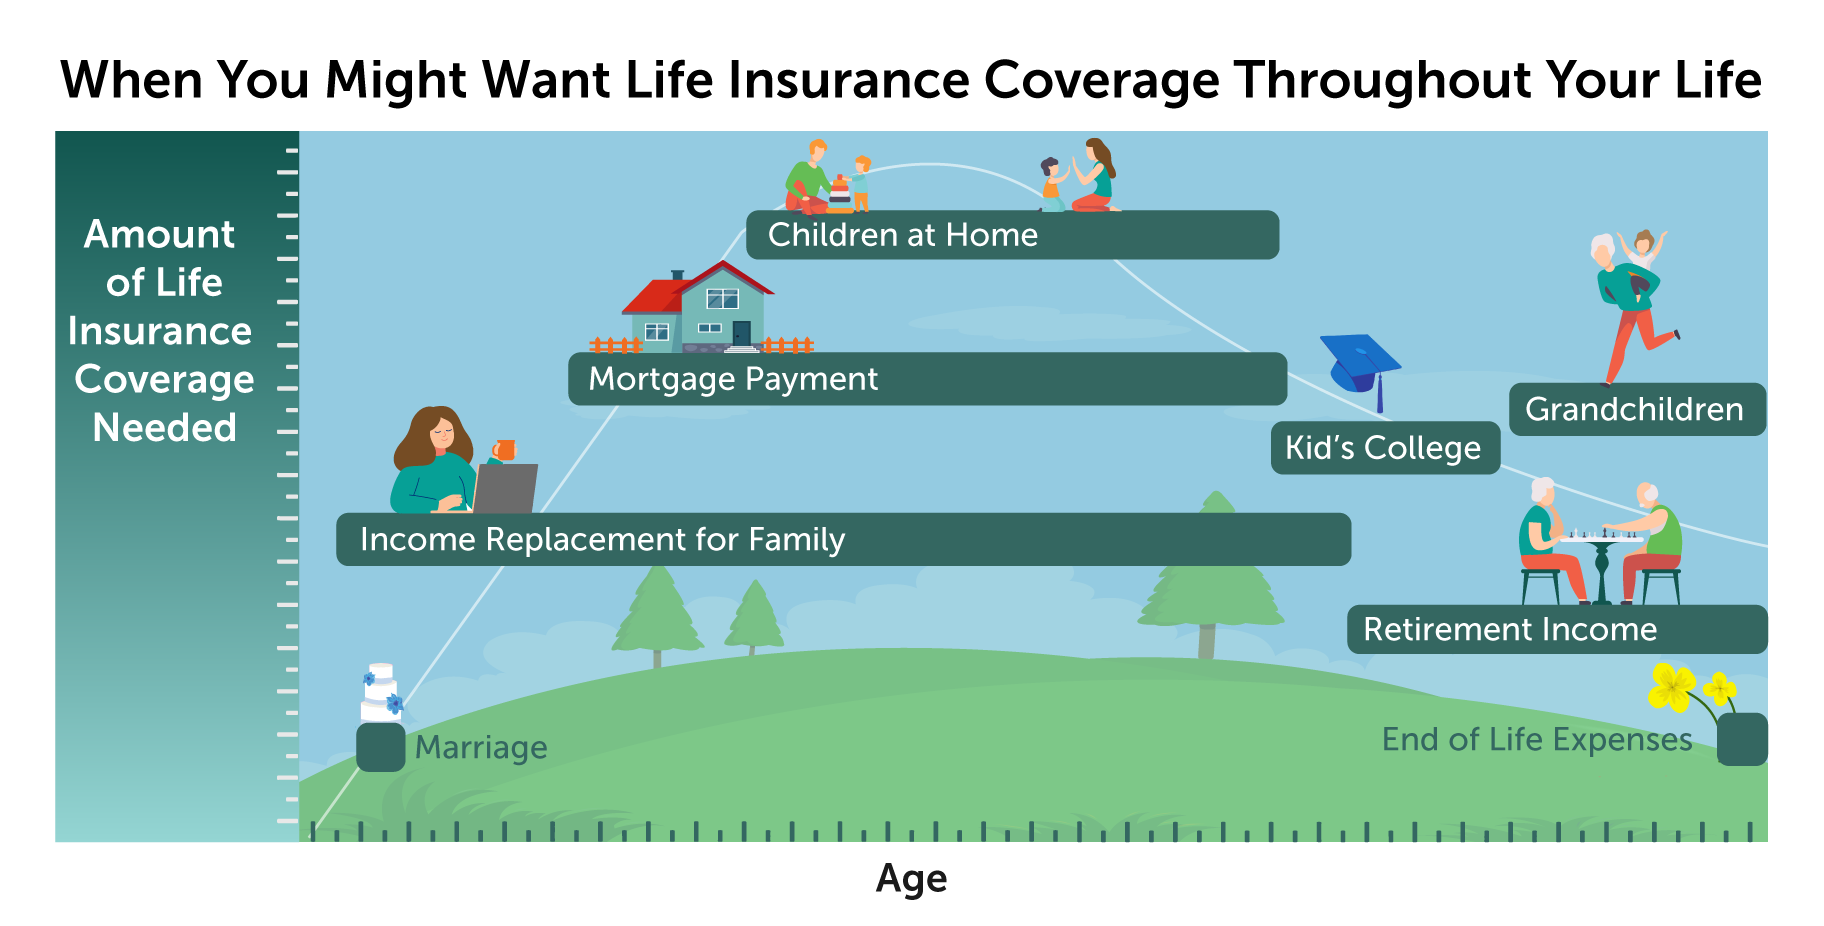 Image that shows a bell curve with life events illustrating when life insurance coverage is most needed. The peak is overlapping illustrations of 'children at home' and 'mortgage payment'